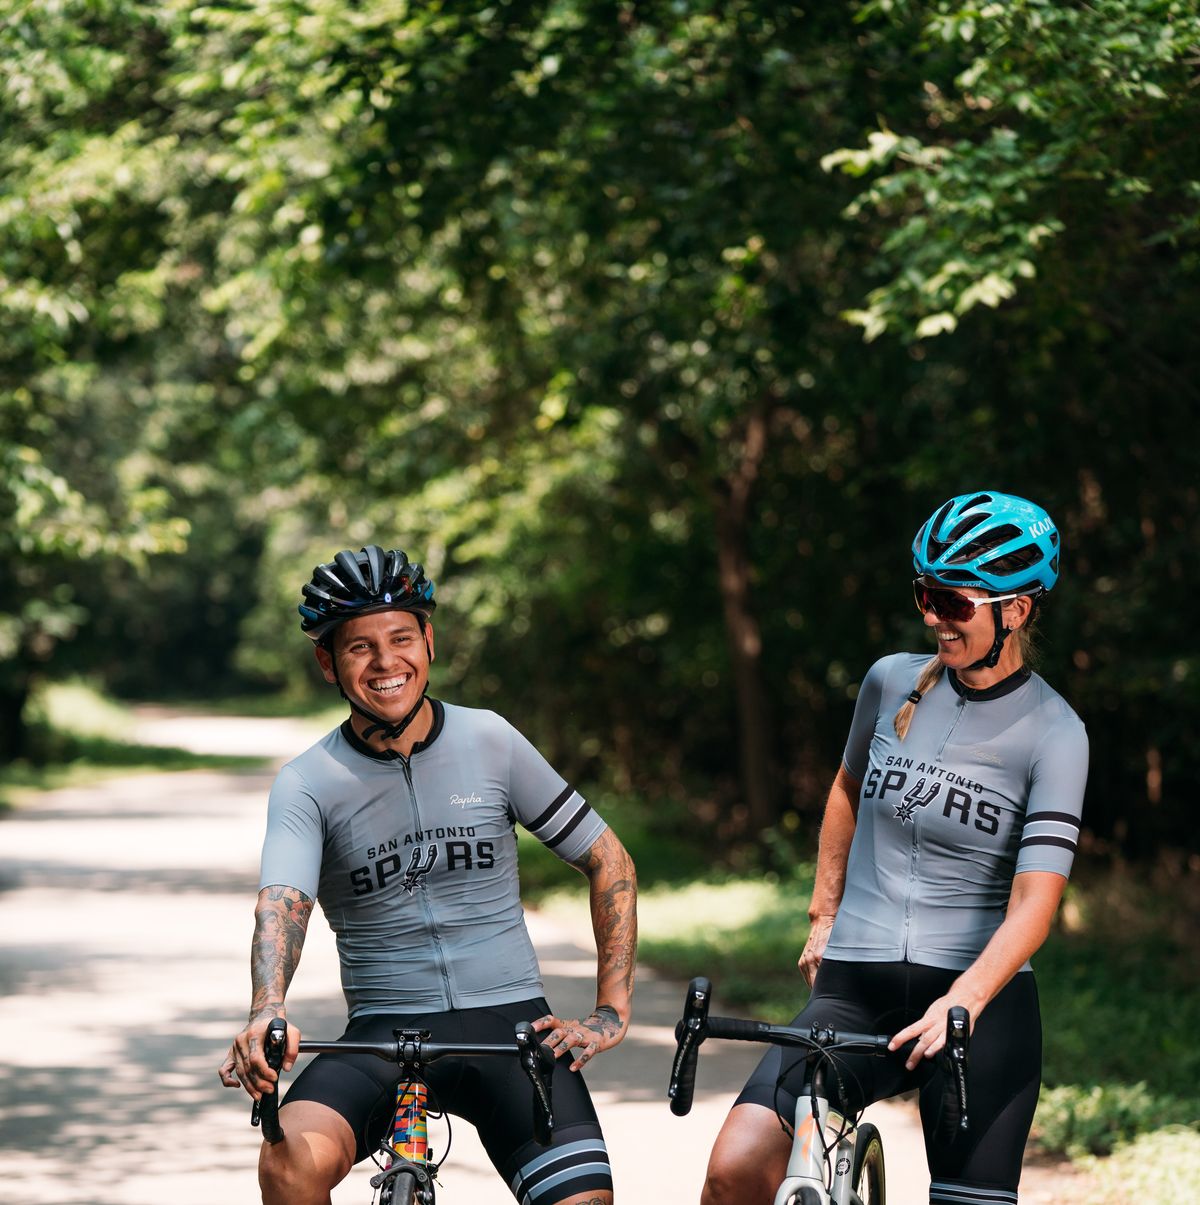 His and Hers Matching Cycling Jerseys for Couples